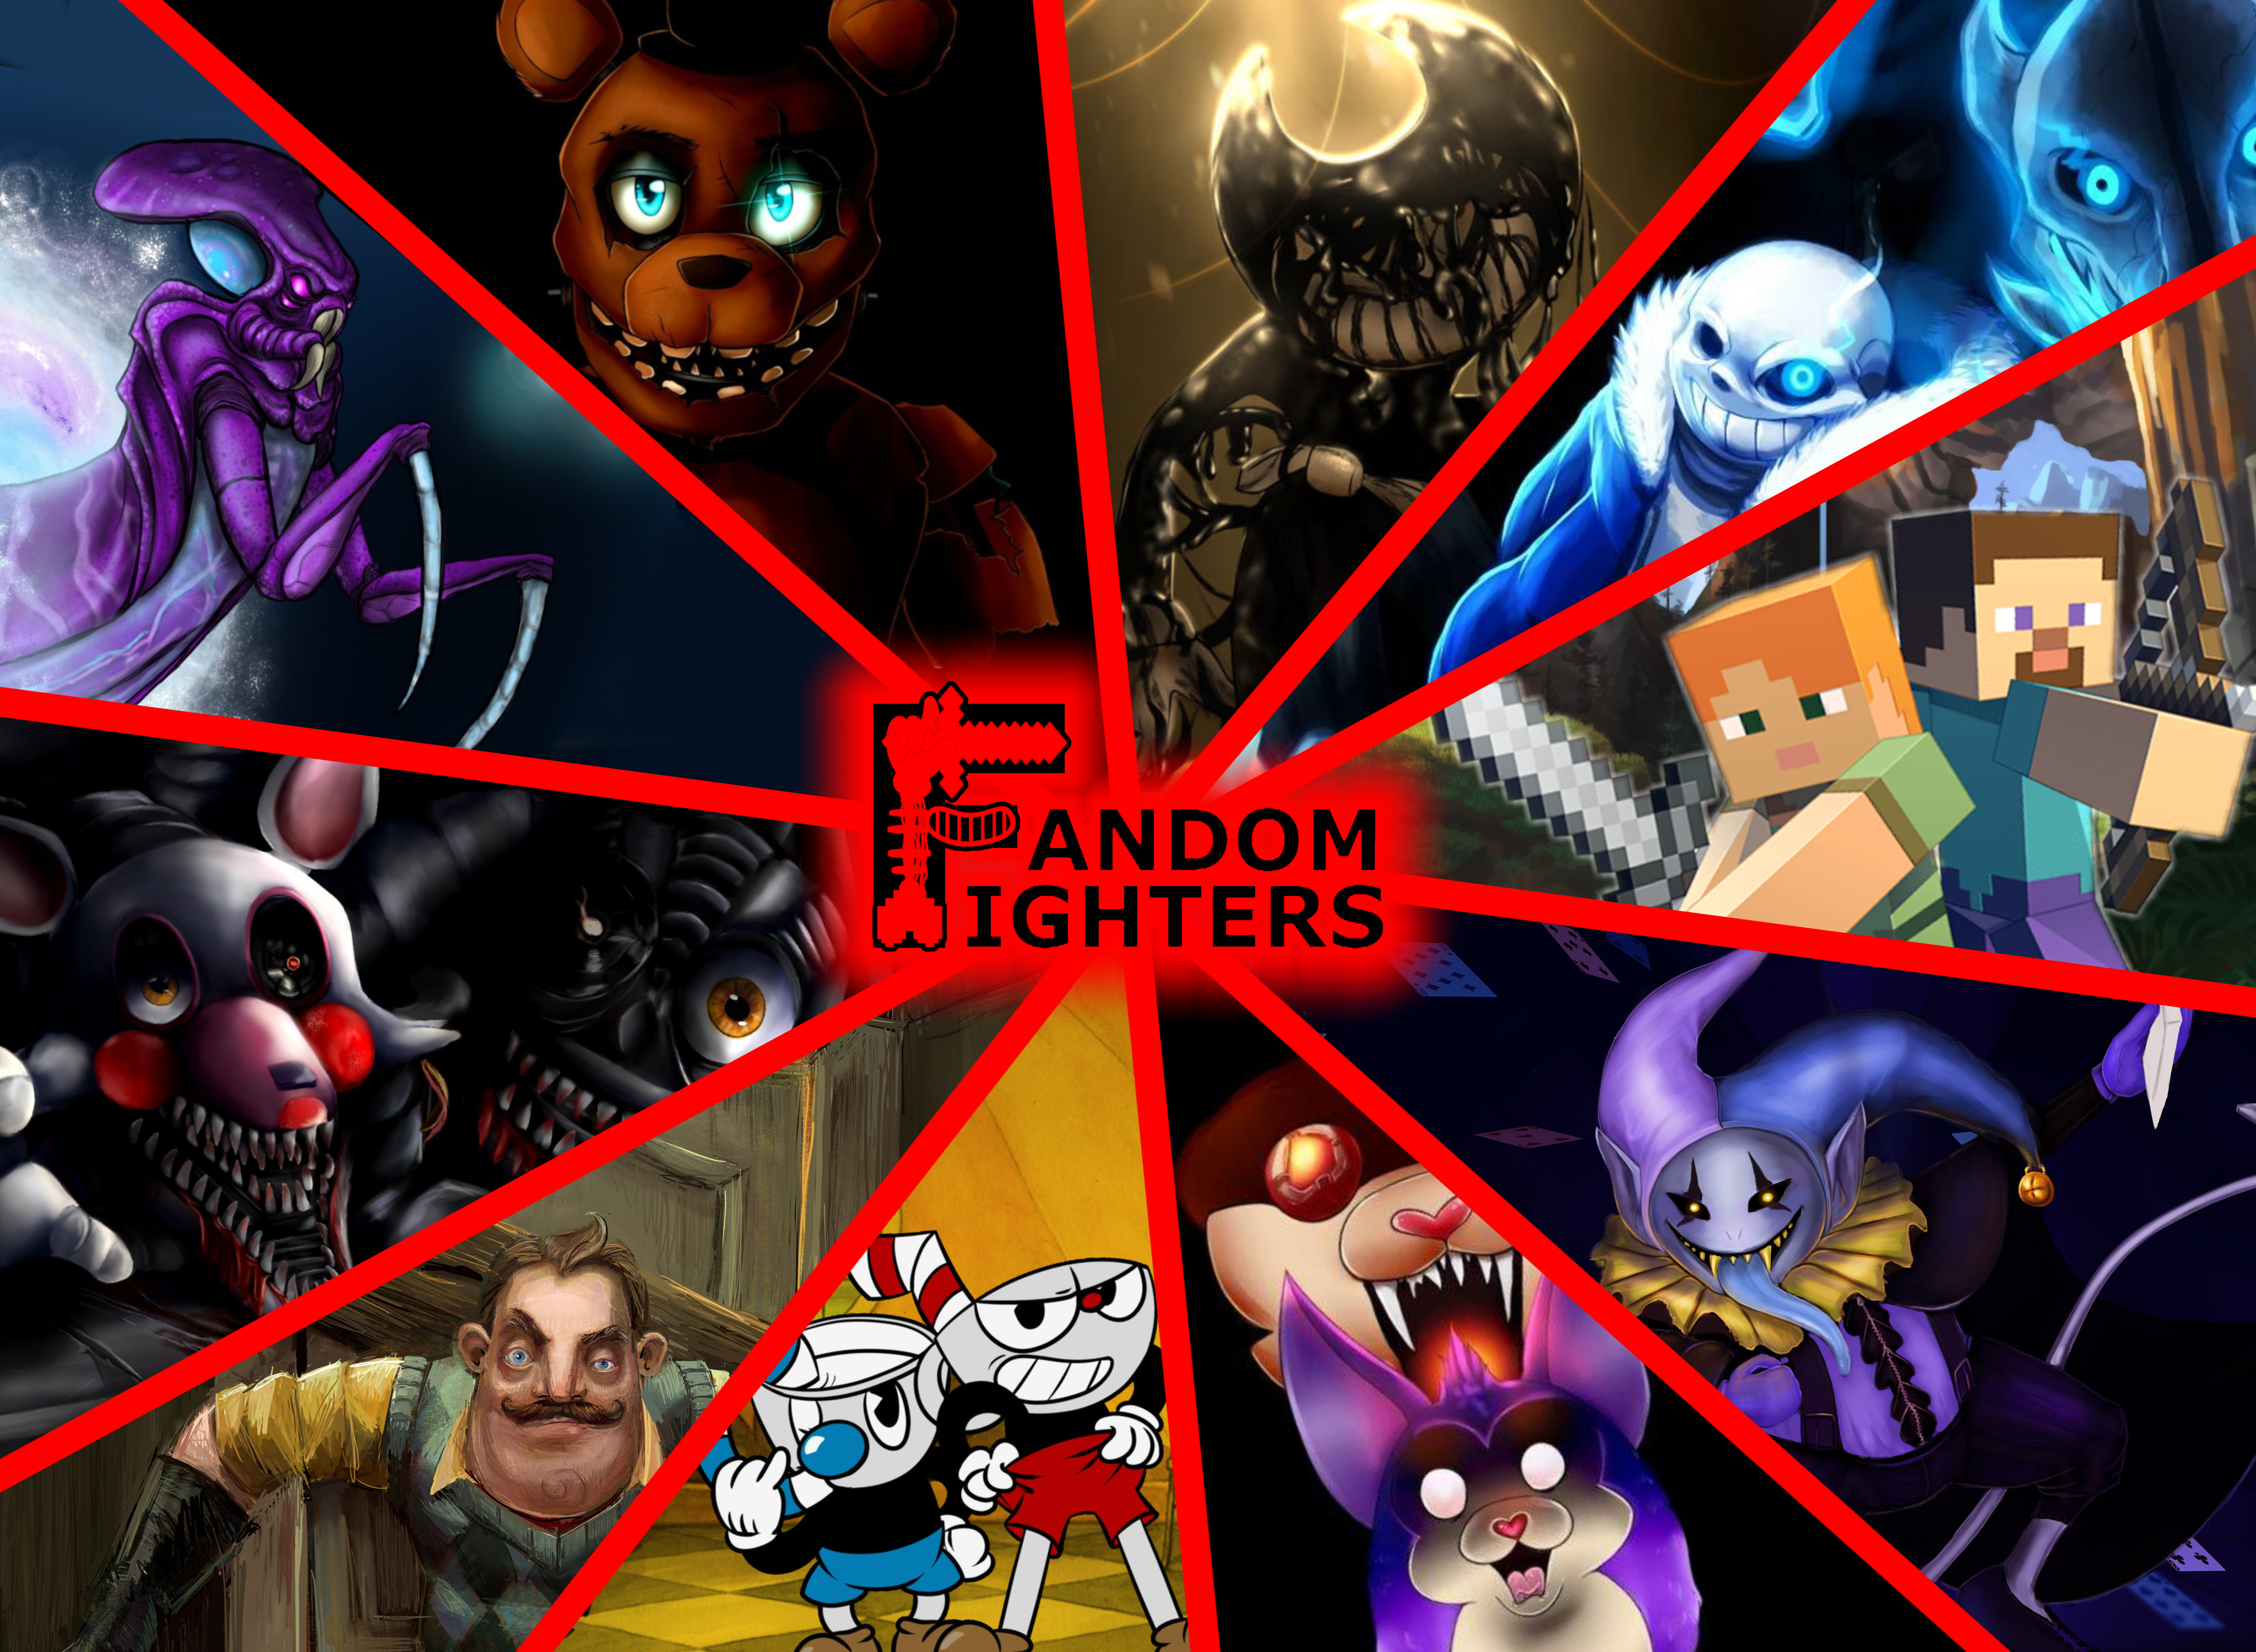 FNaF True Ultimate Custom Night Roster by Dudebromanguyperson on